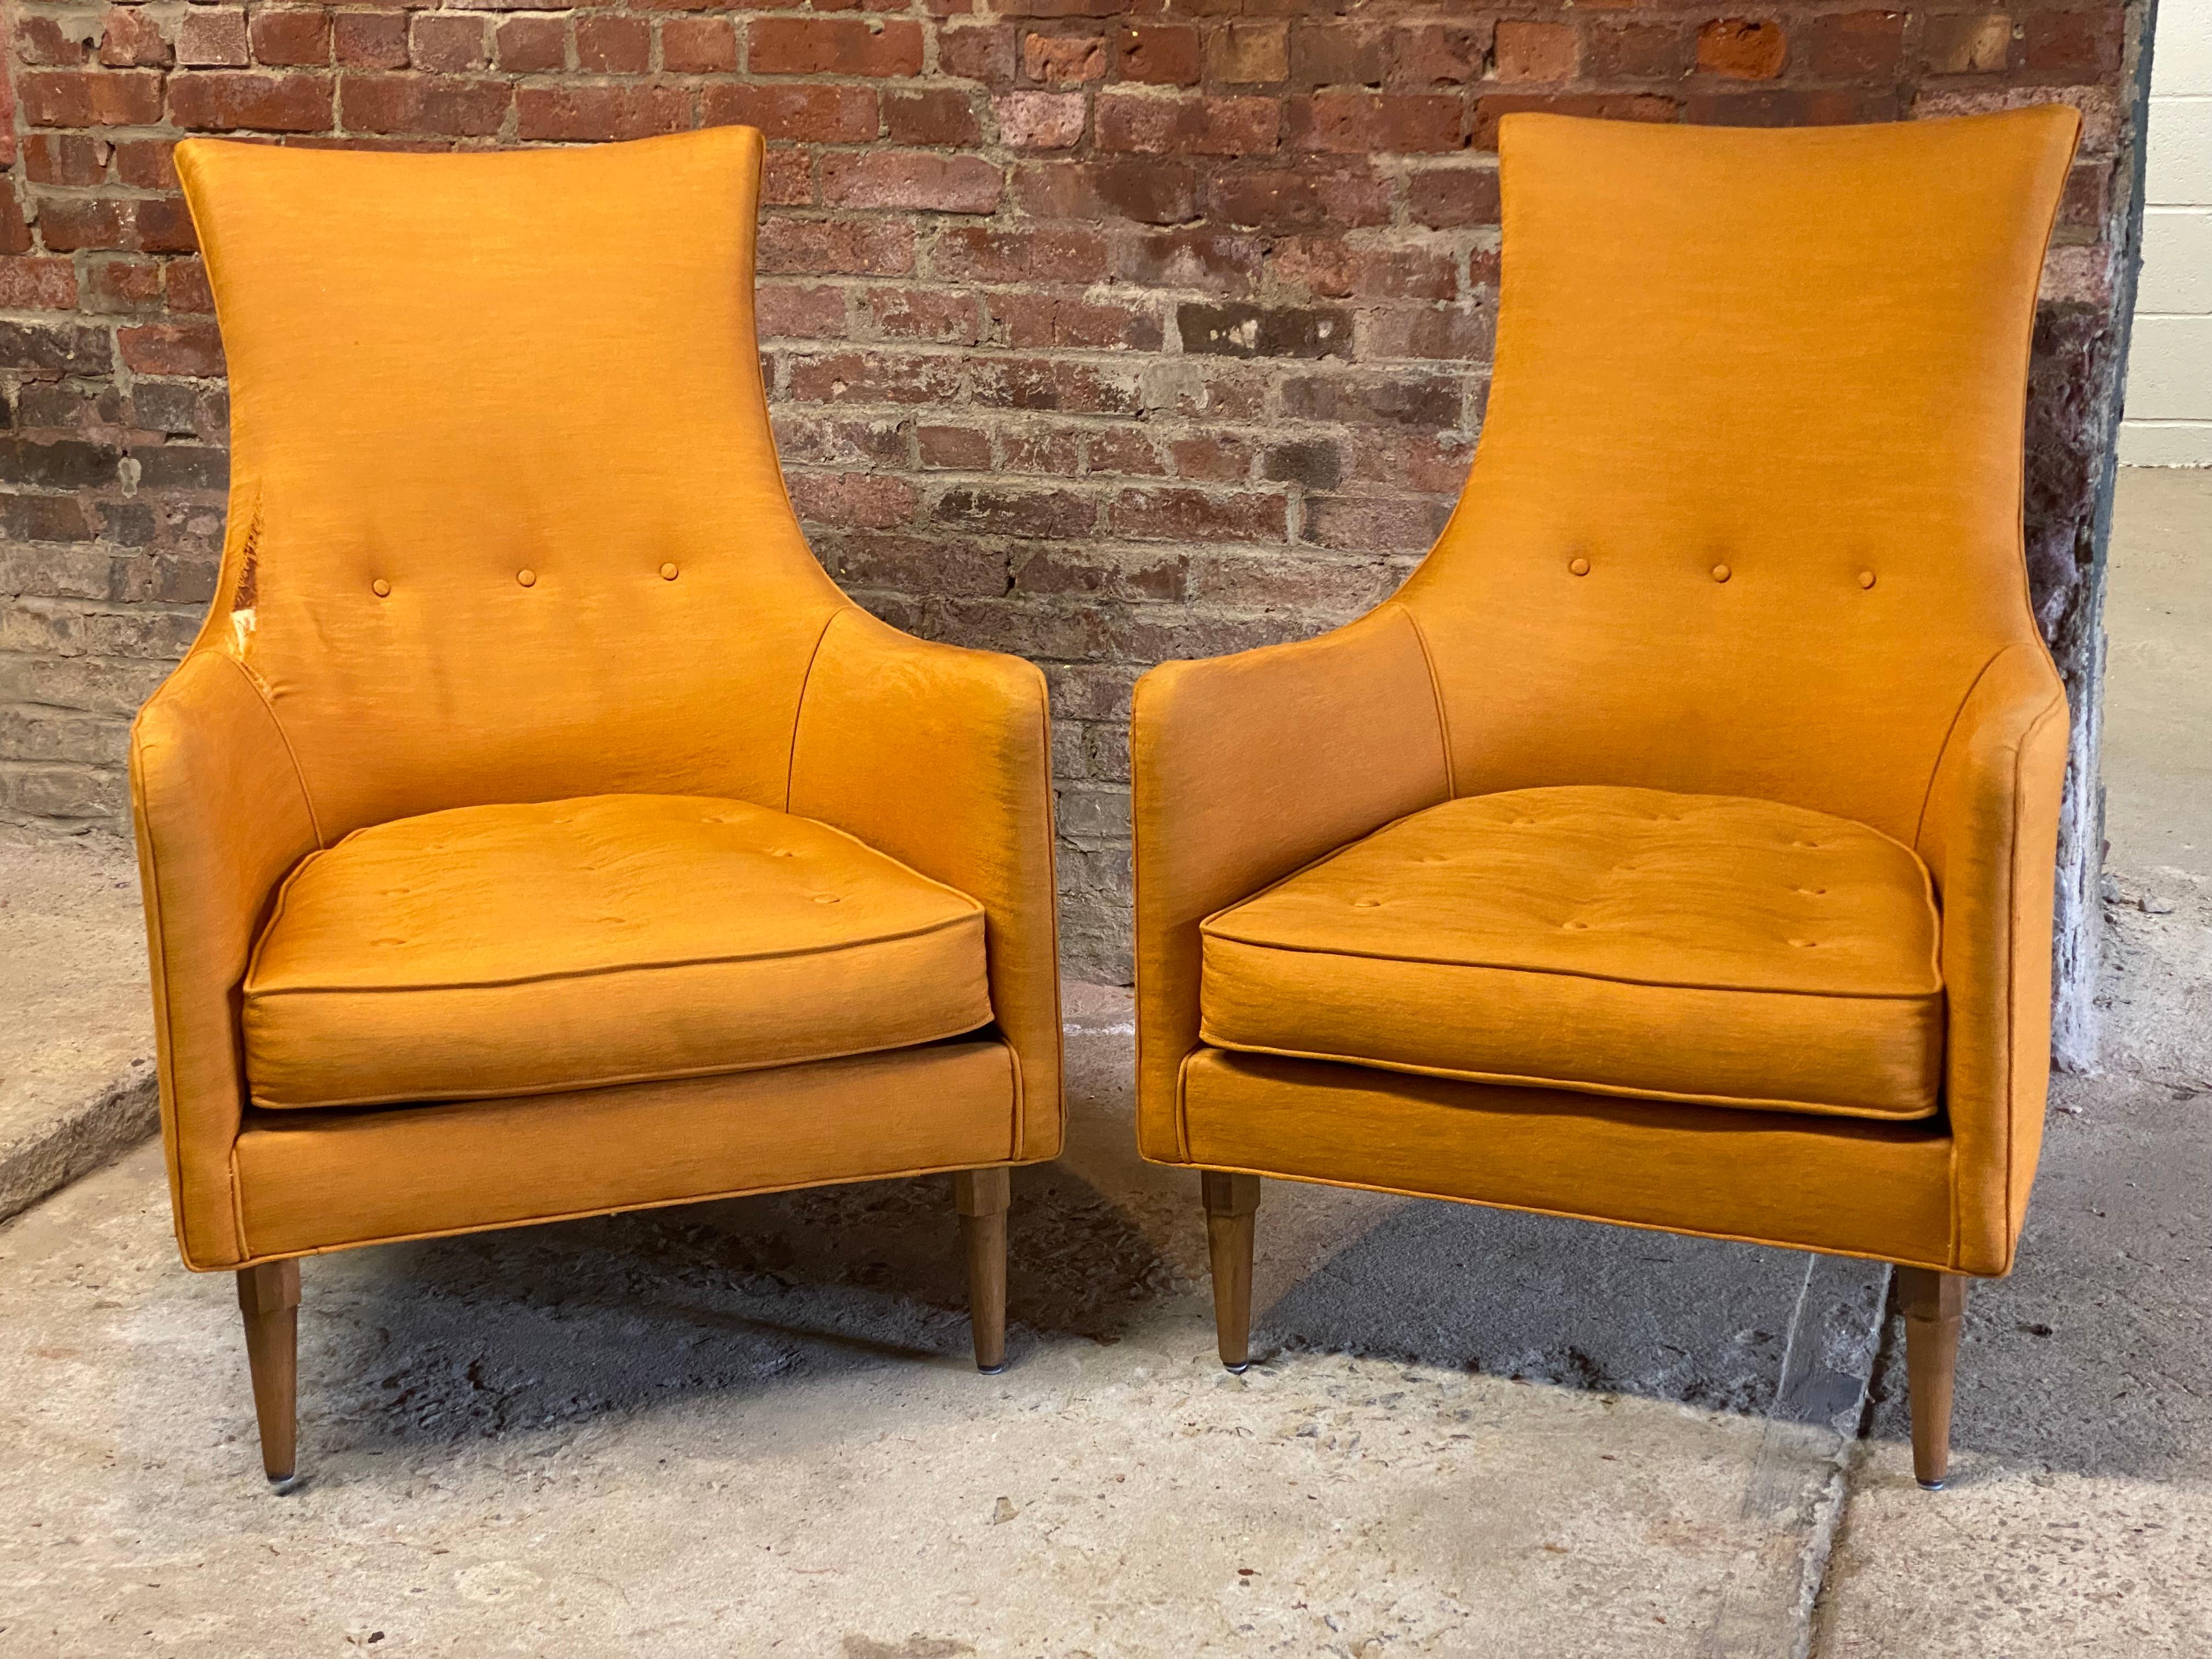 A very nice pair of 1960s upholstered high back chairs. Featuring sculpted and arched backs and arms, buttoned backs and seat cushions and solid wood legs with faceted tops. Fun and fresh orange fabric upholstery.

One chair is in good condition